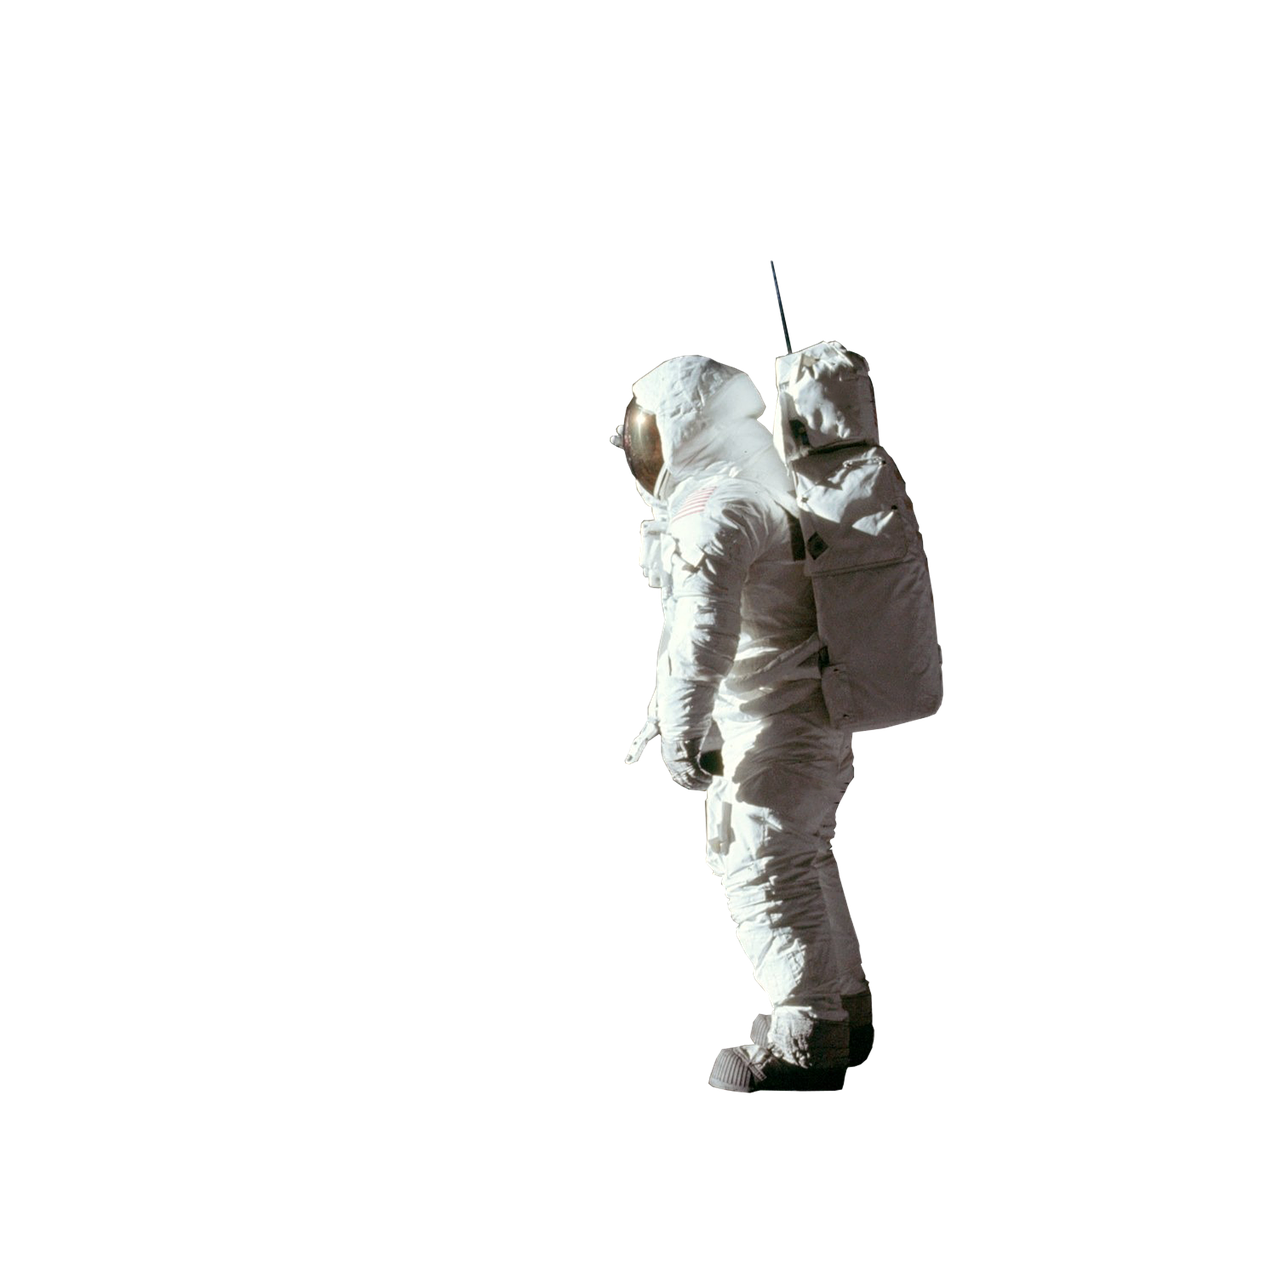 astronaut isolated wear protective clothing free photo